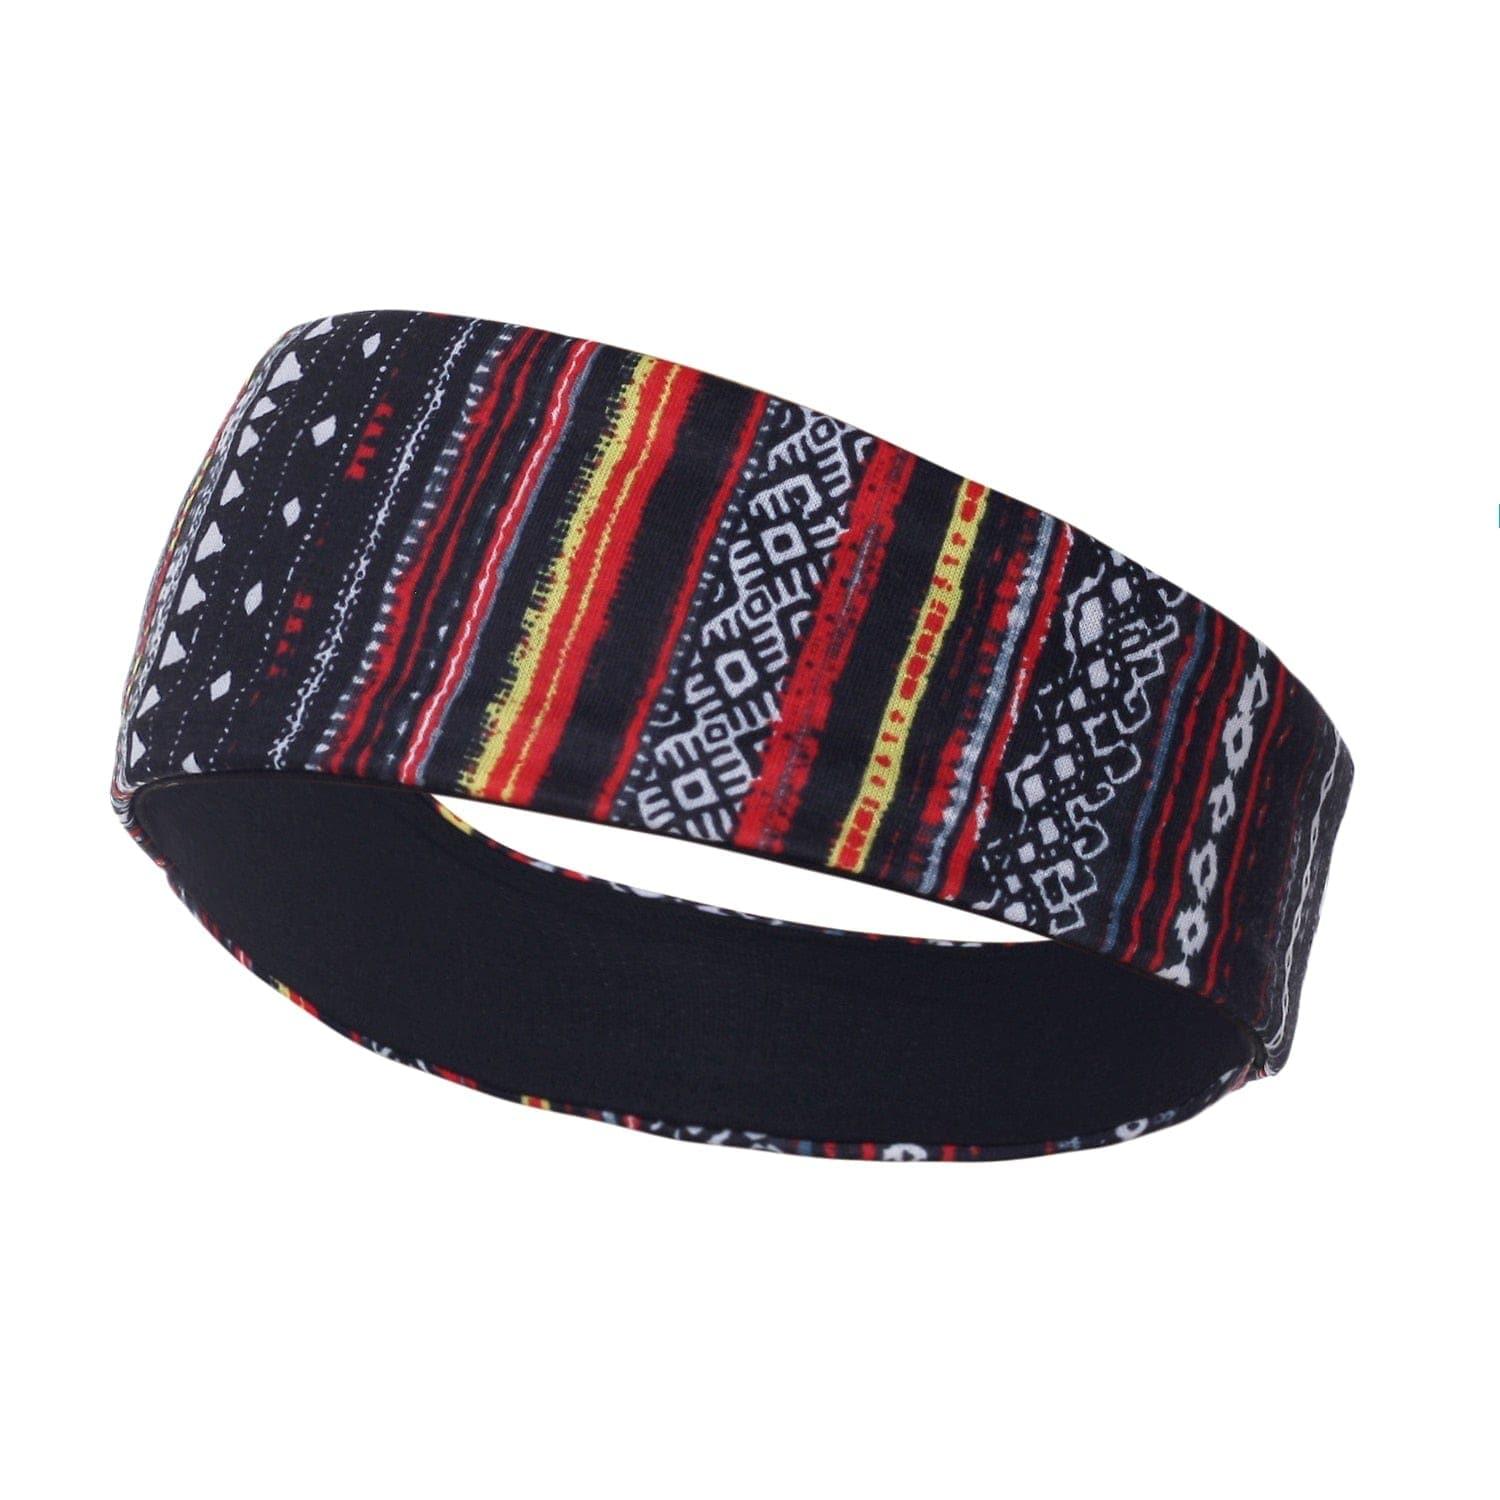 Men sweatband sports Headband Stretch Elastic Women Yoga Running hair band for men Outdoor Sport Headwrap Fitness Sports safety - Ammpoure Wellbeing